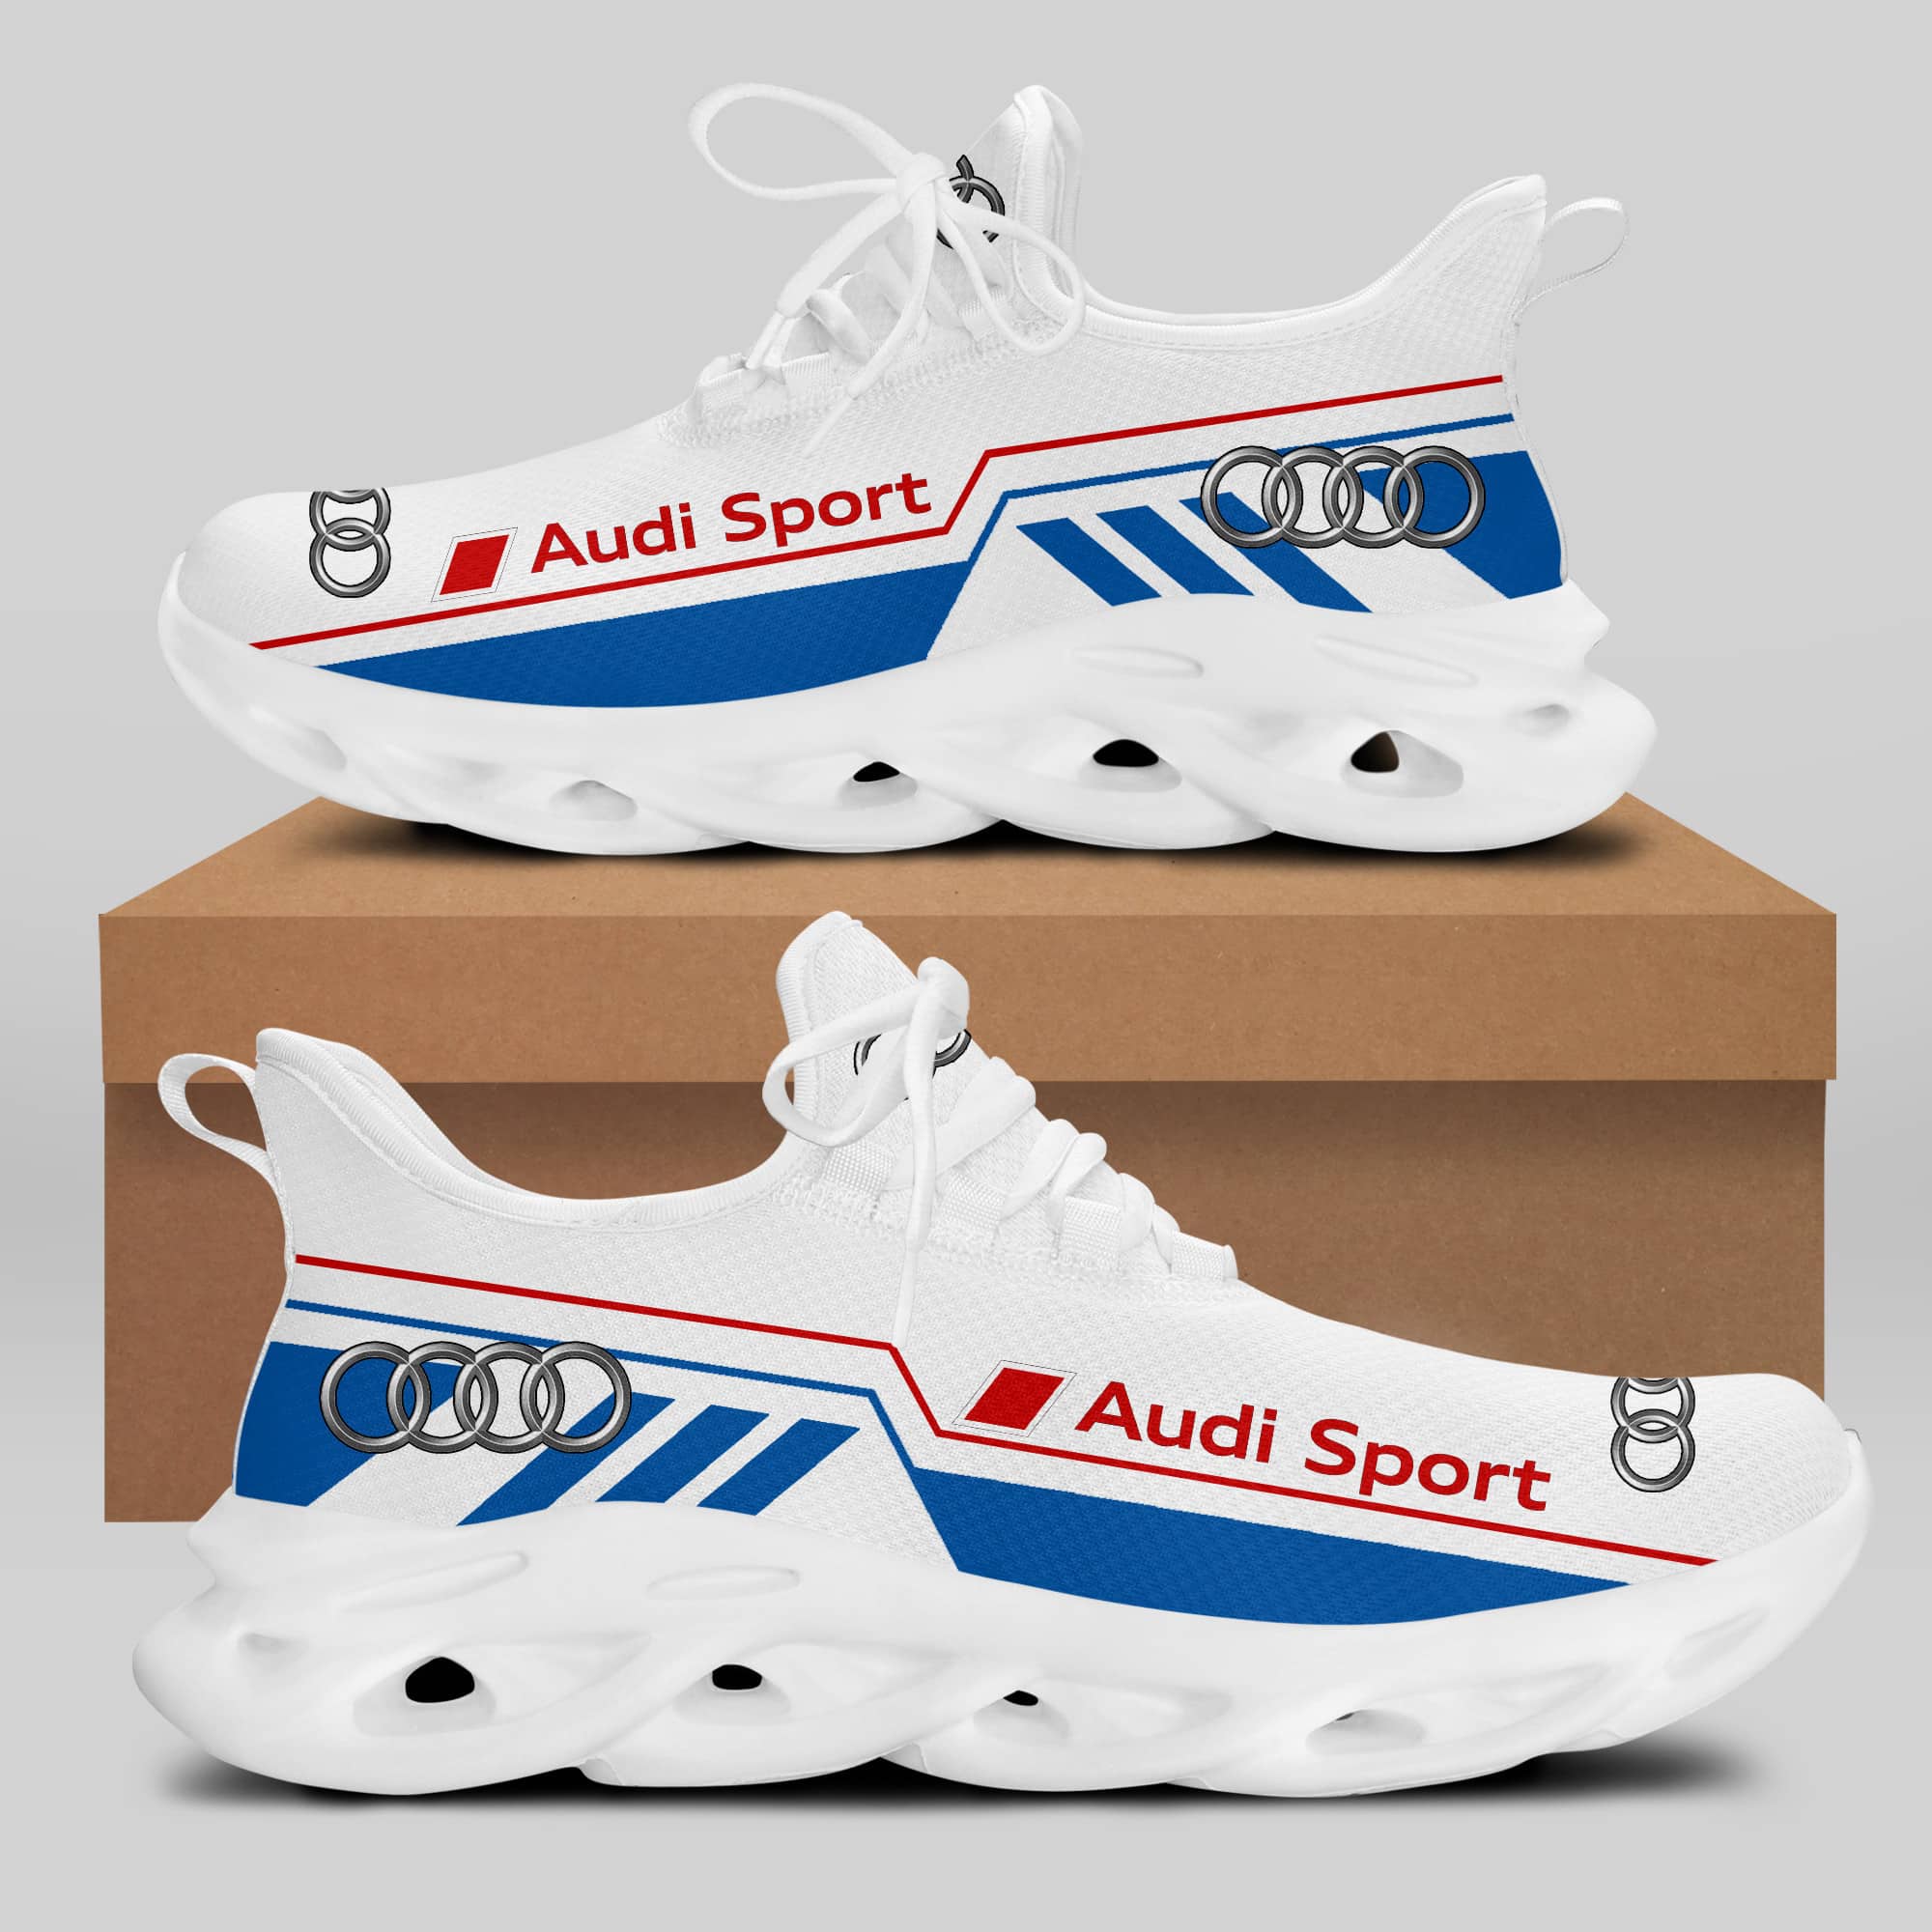 Audi Sport Running Shoes Max Soul Shoes Sneakers Ver 19 1